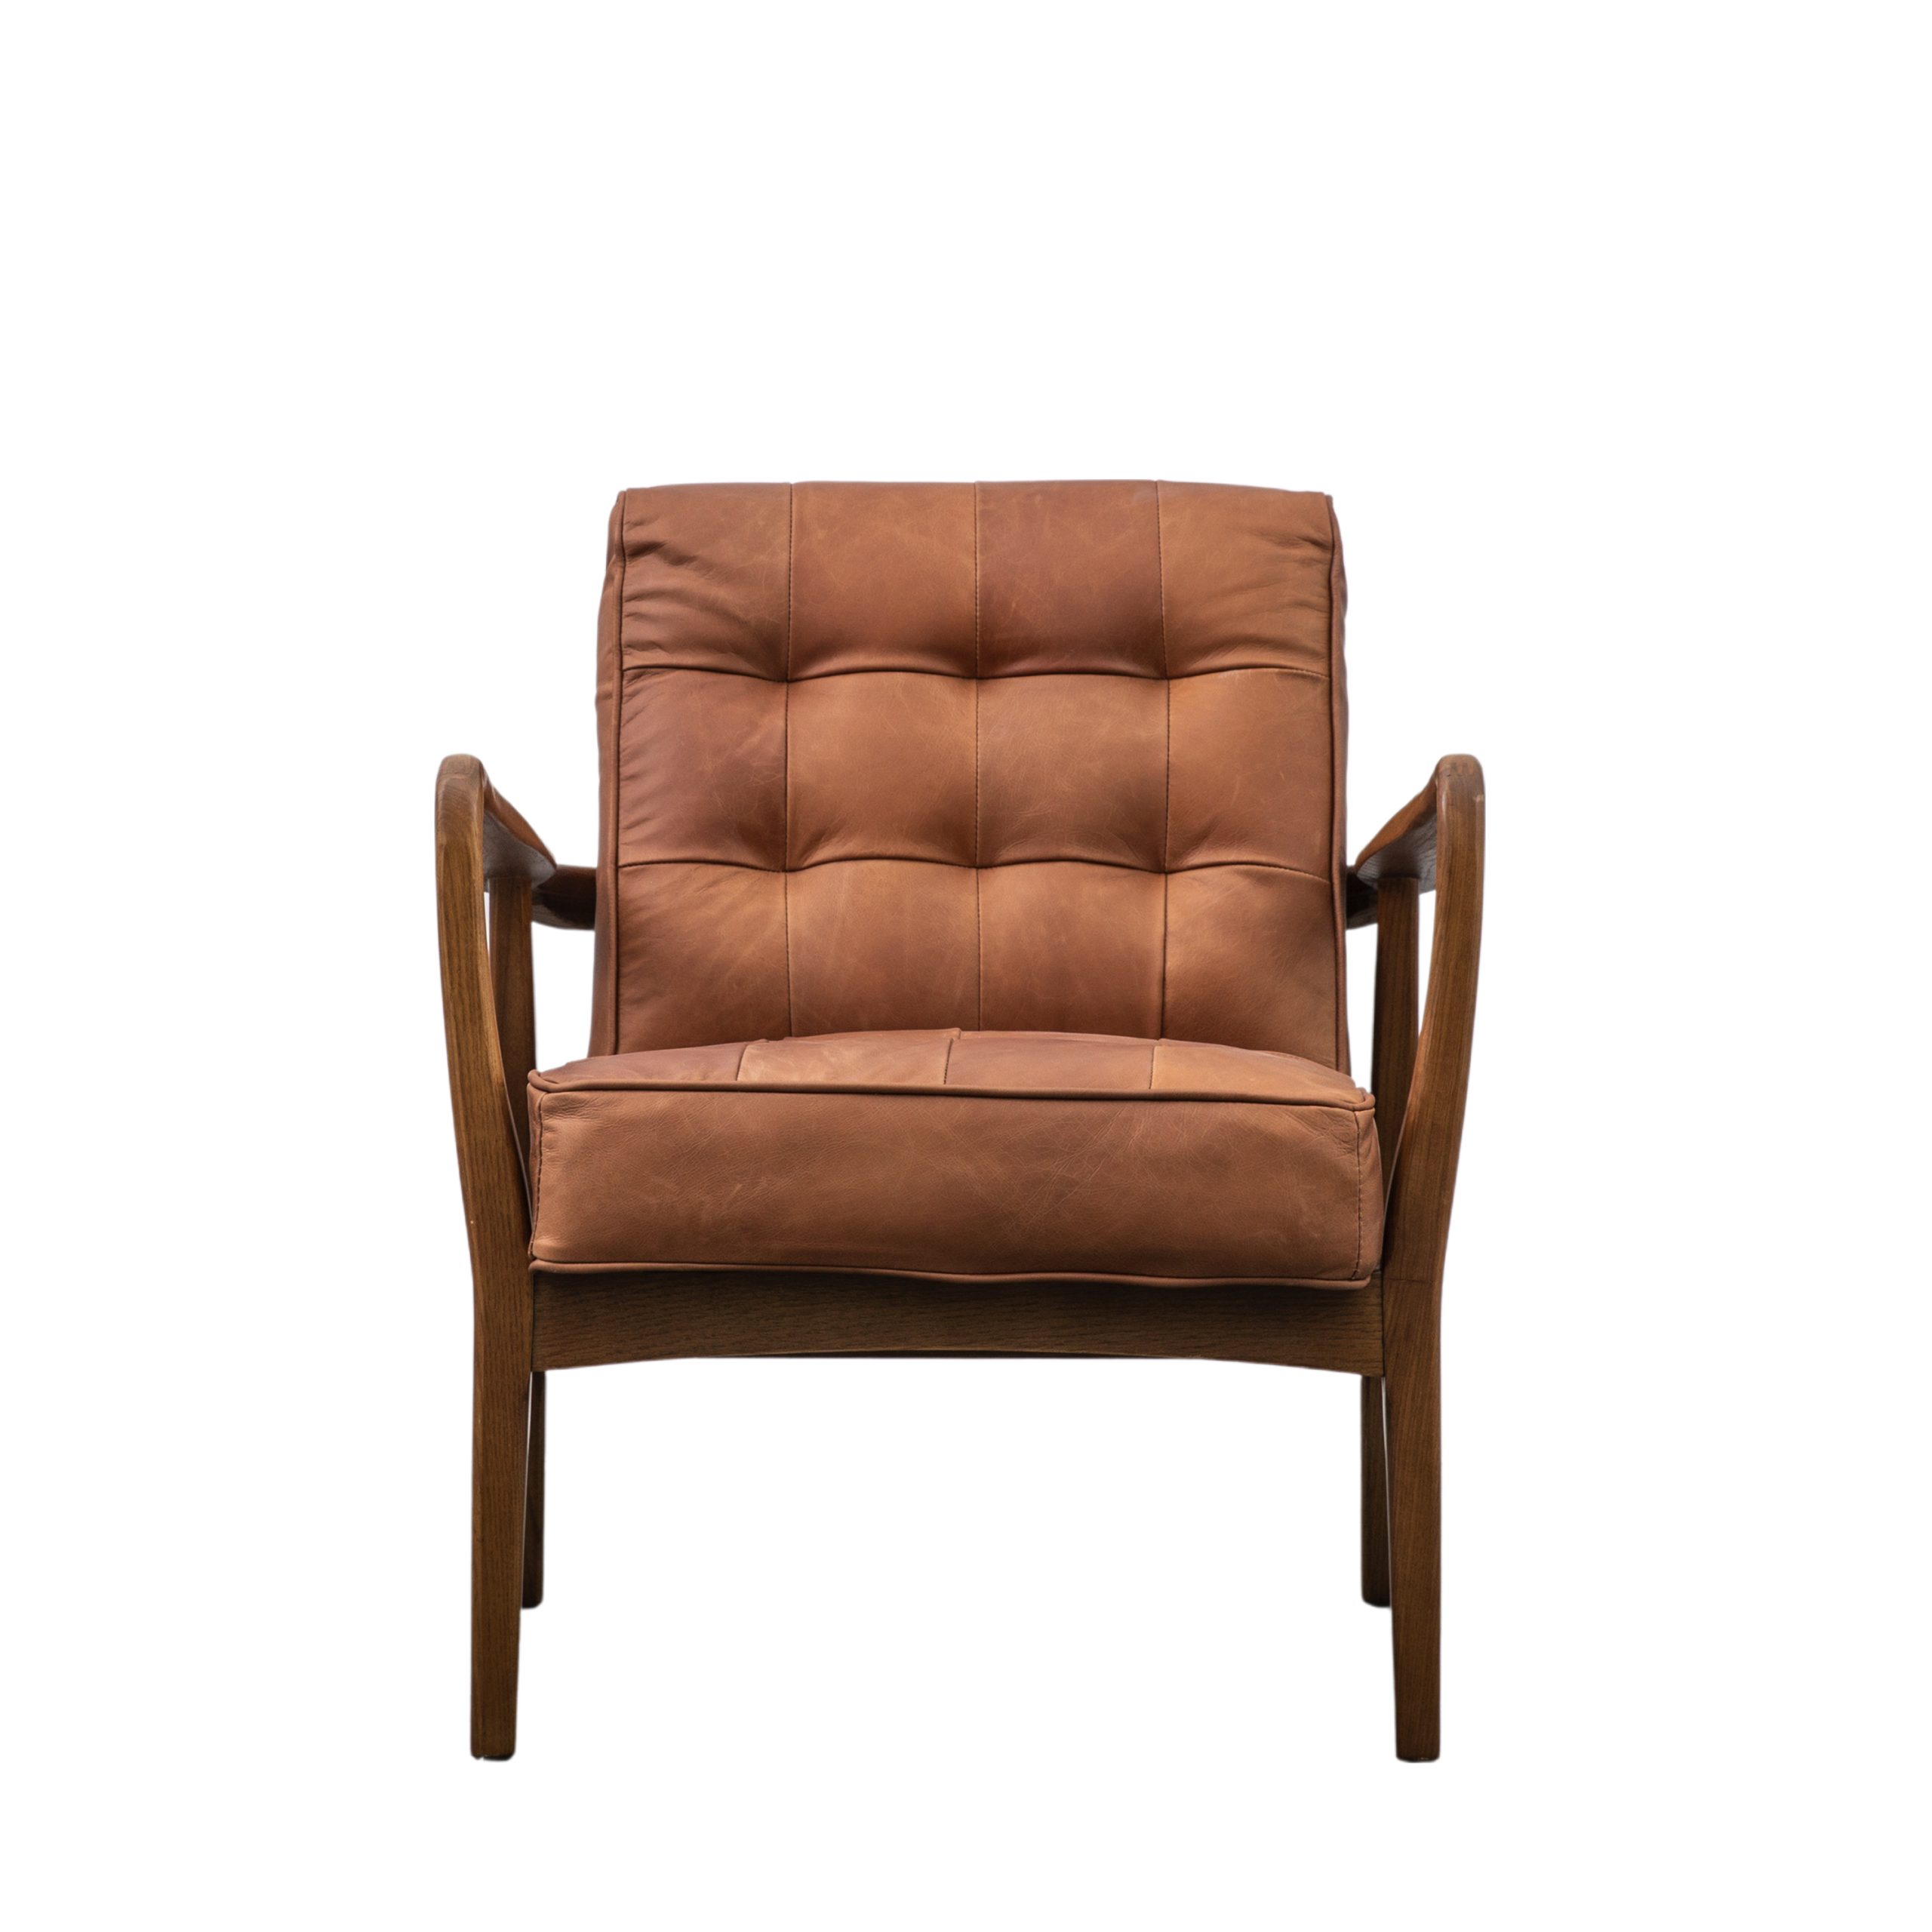 Gallery Direct Humber Armchair Vintage Brown Leather